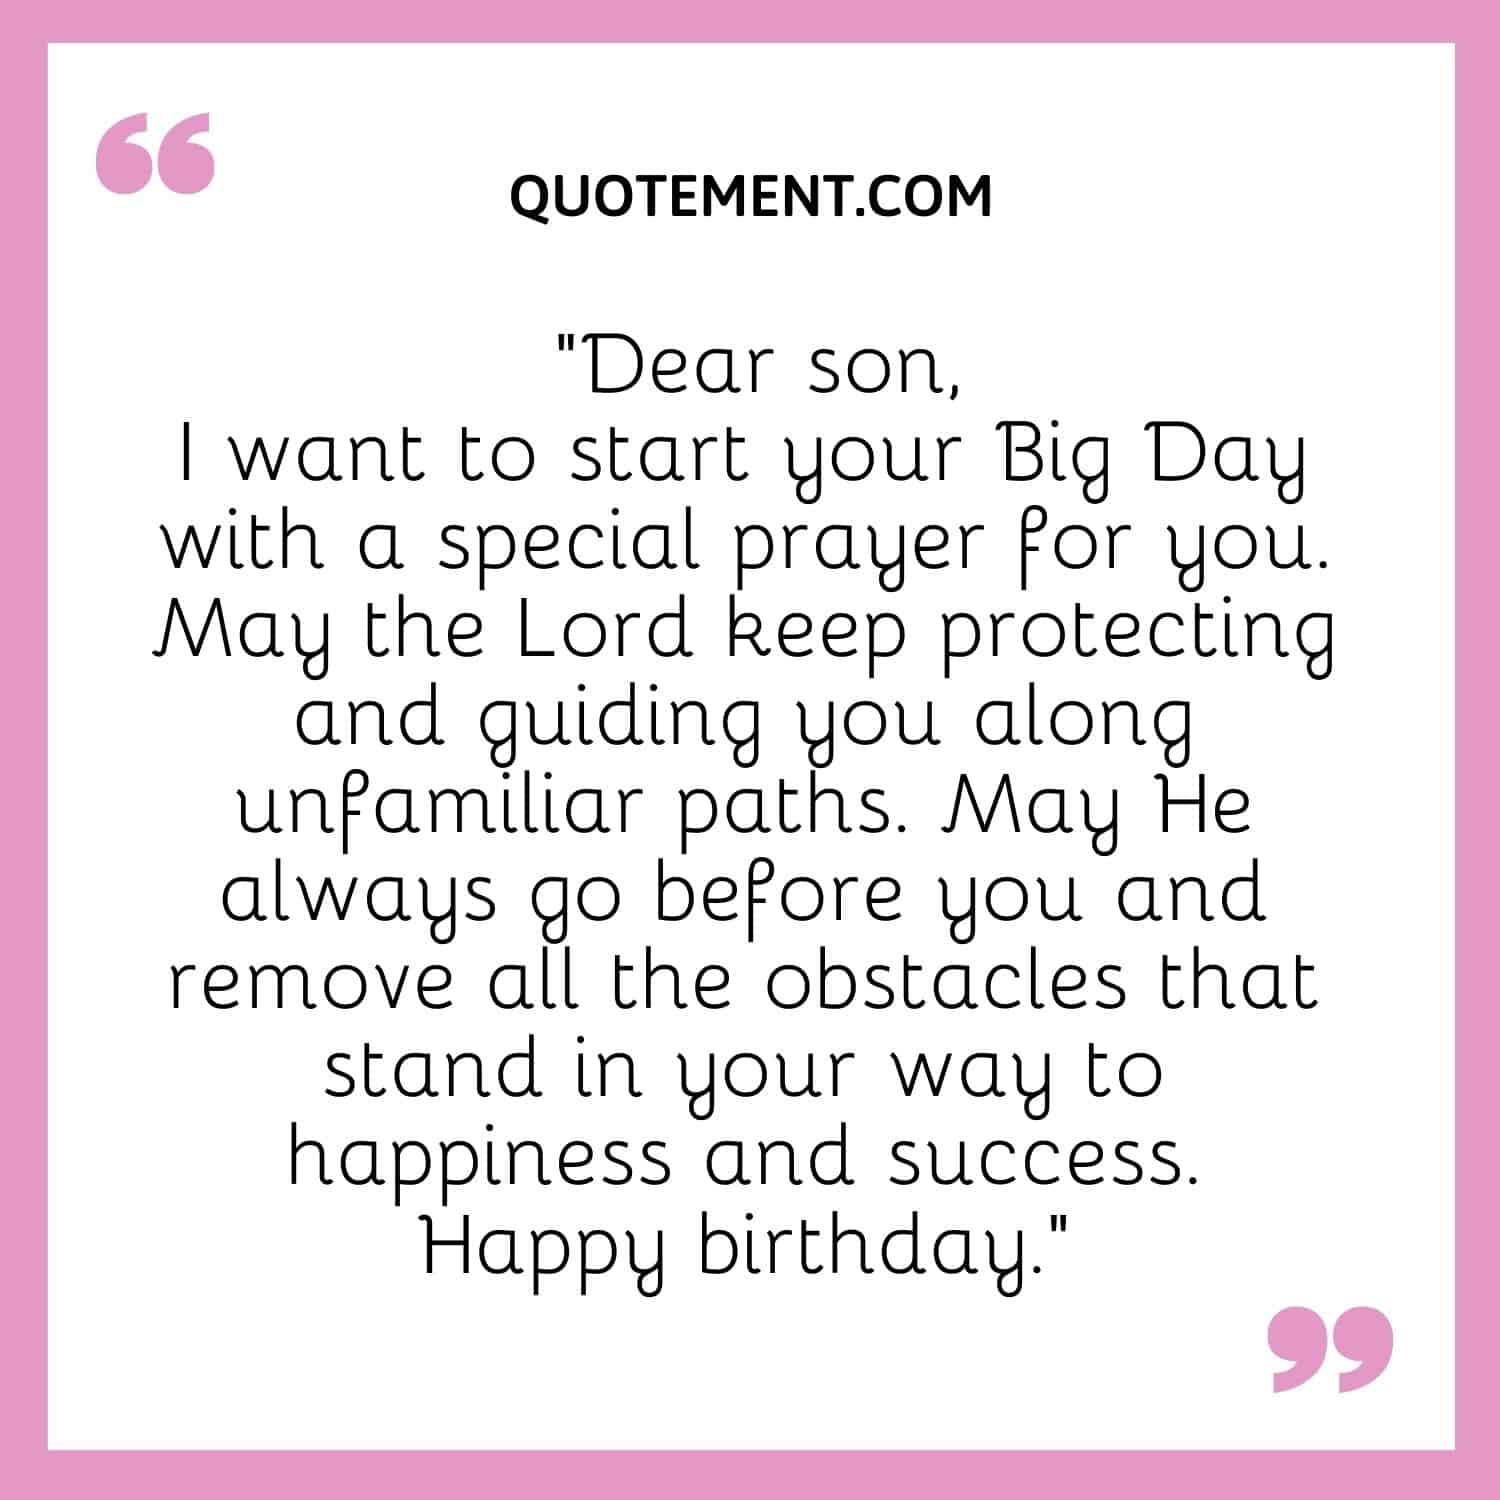 Dear son, I want to start your Big Day with a special prayer for you